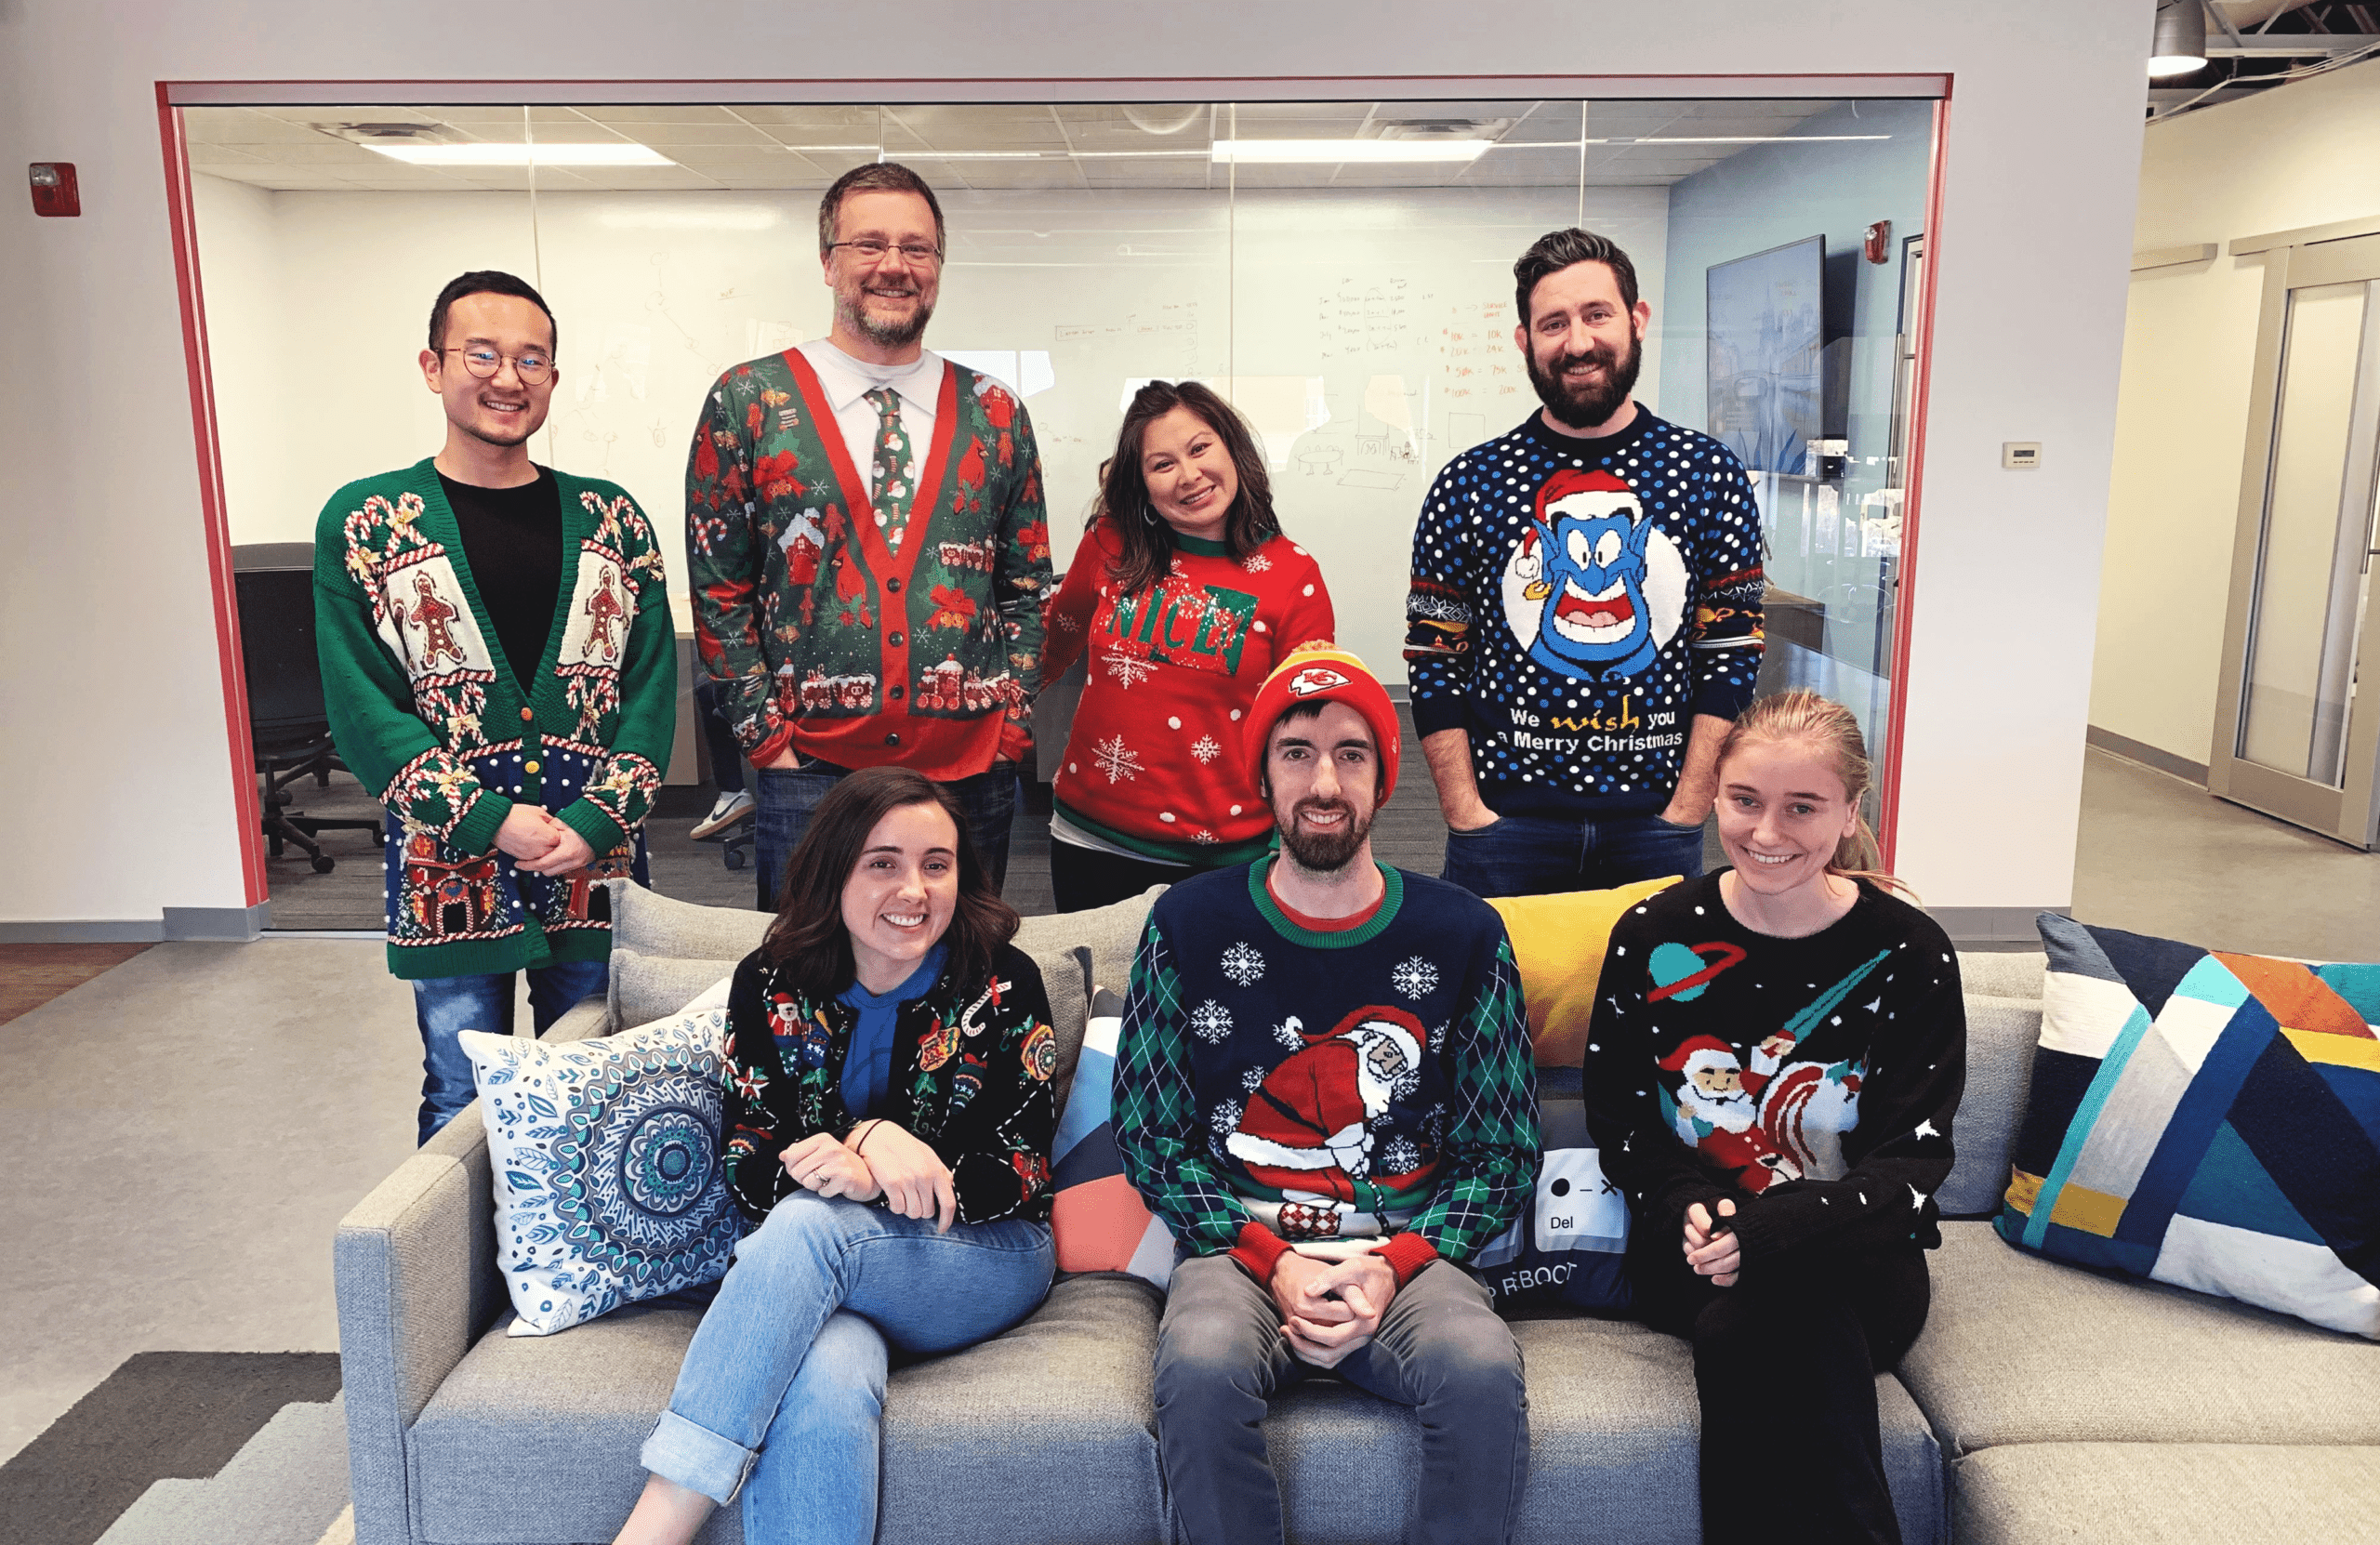 The Capacity team wearing ugly Christmas sweaters